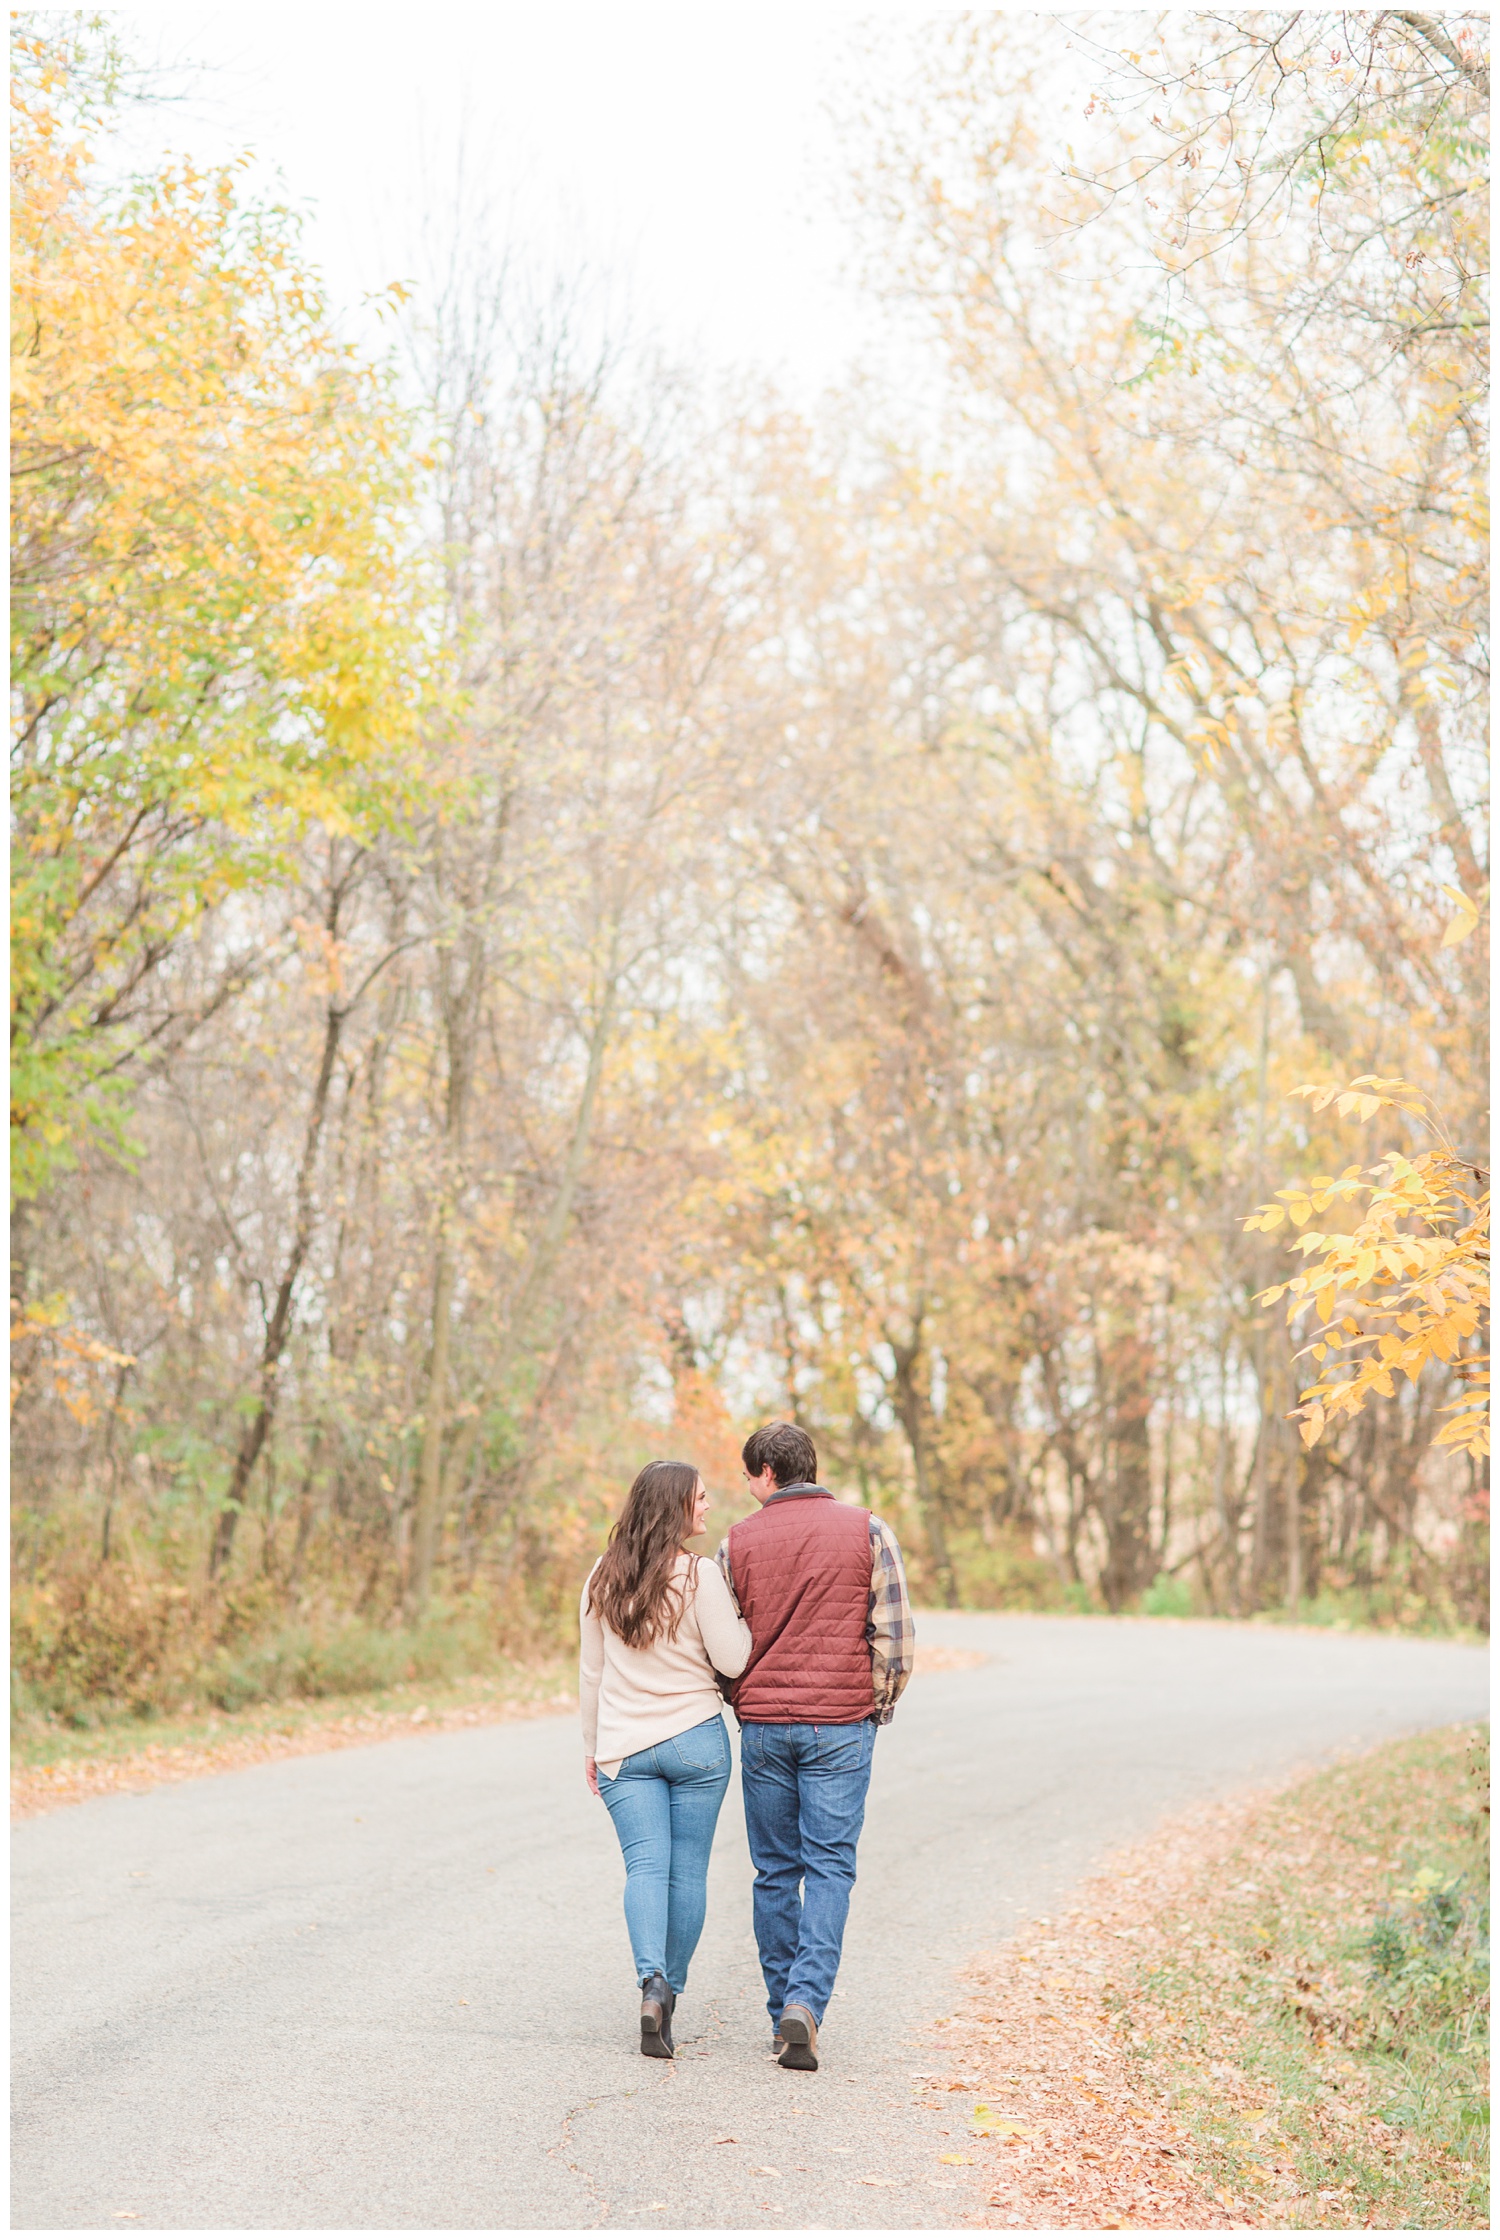 Fall in Iowa, Jenna and Brady link arms as they walk along an autumn path at Lost Island Nature Center | CB Studio